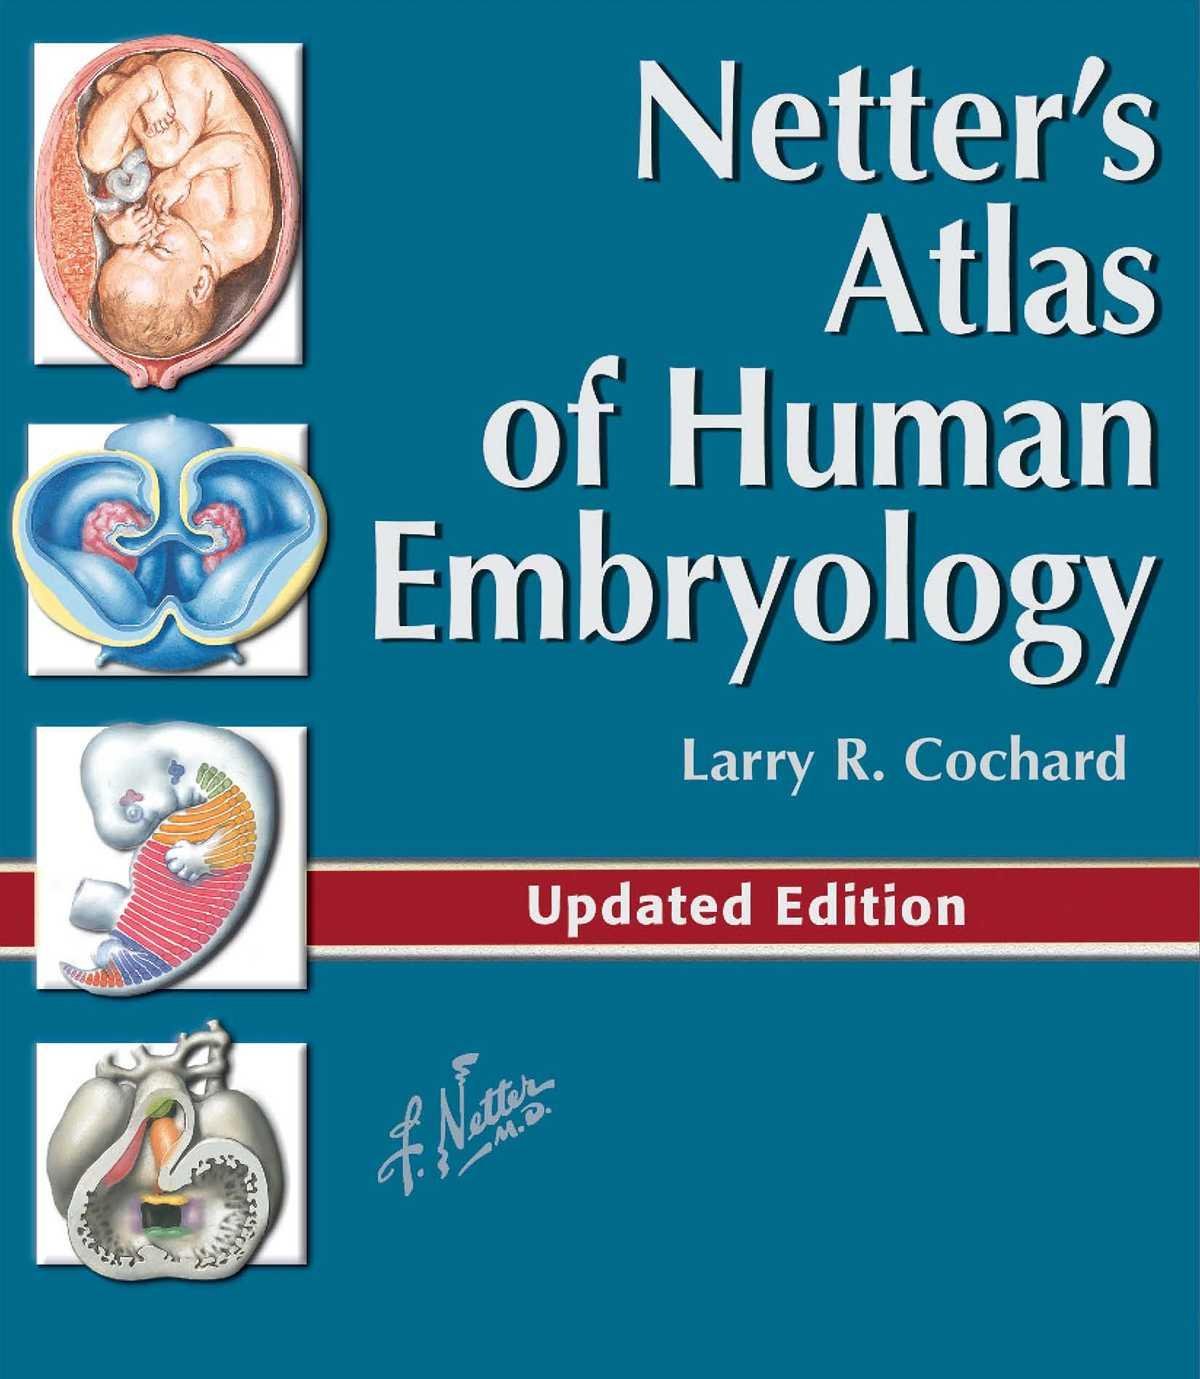 Download Netter's Atlas of Human Embryology SoftArchive